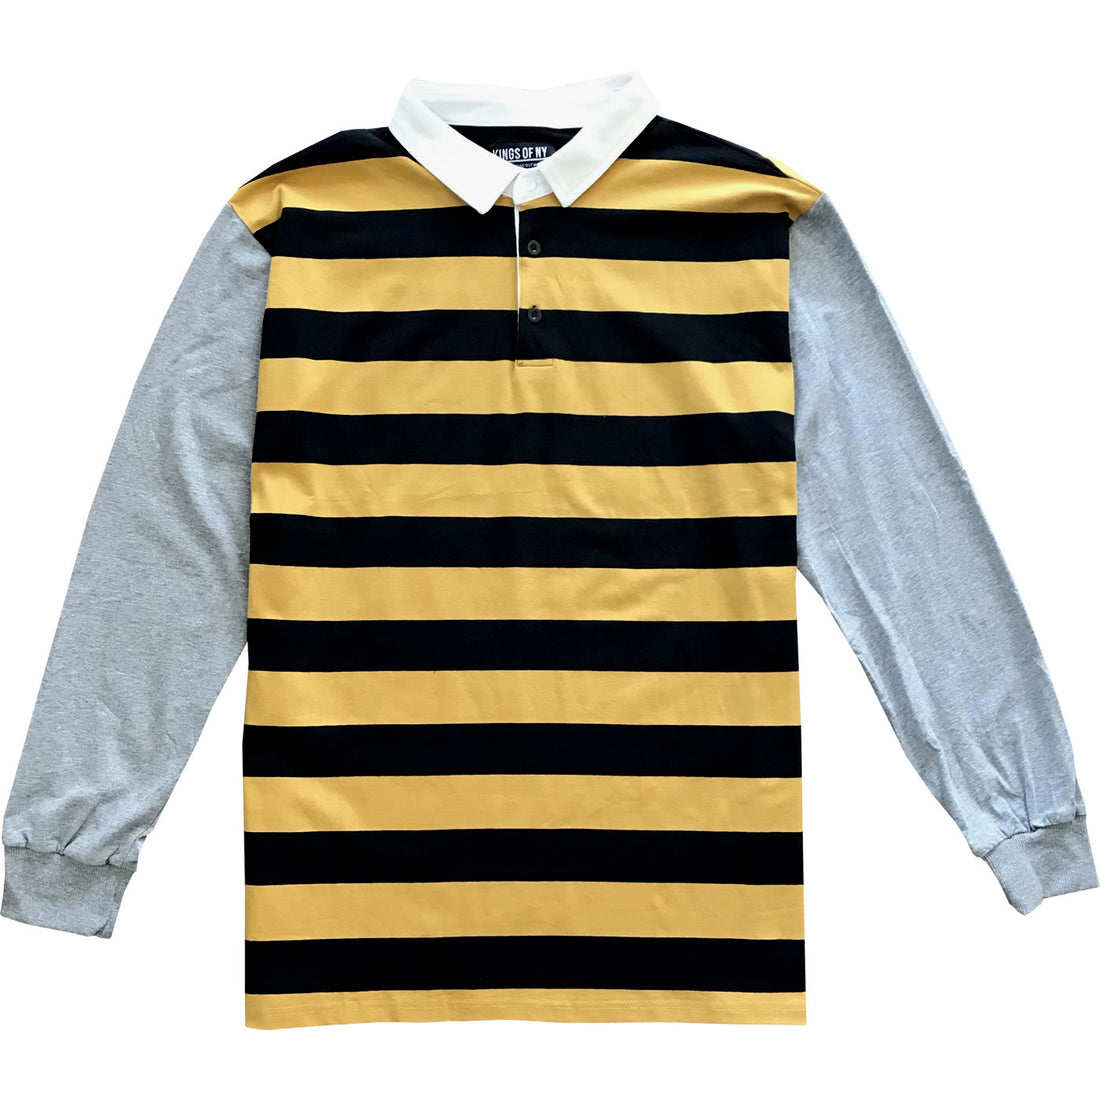 Black and Yellow Striped Mens Rugby Shirt